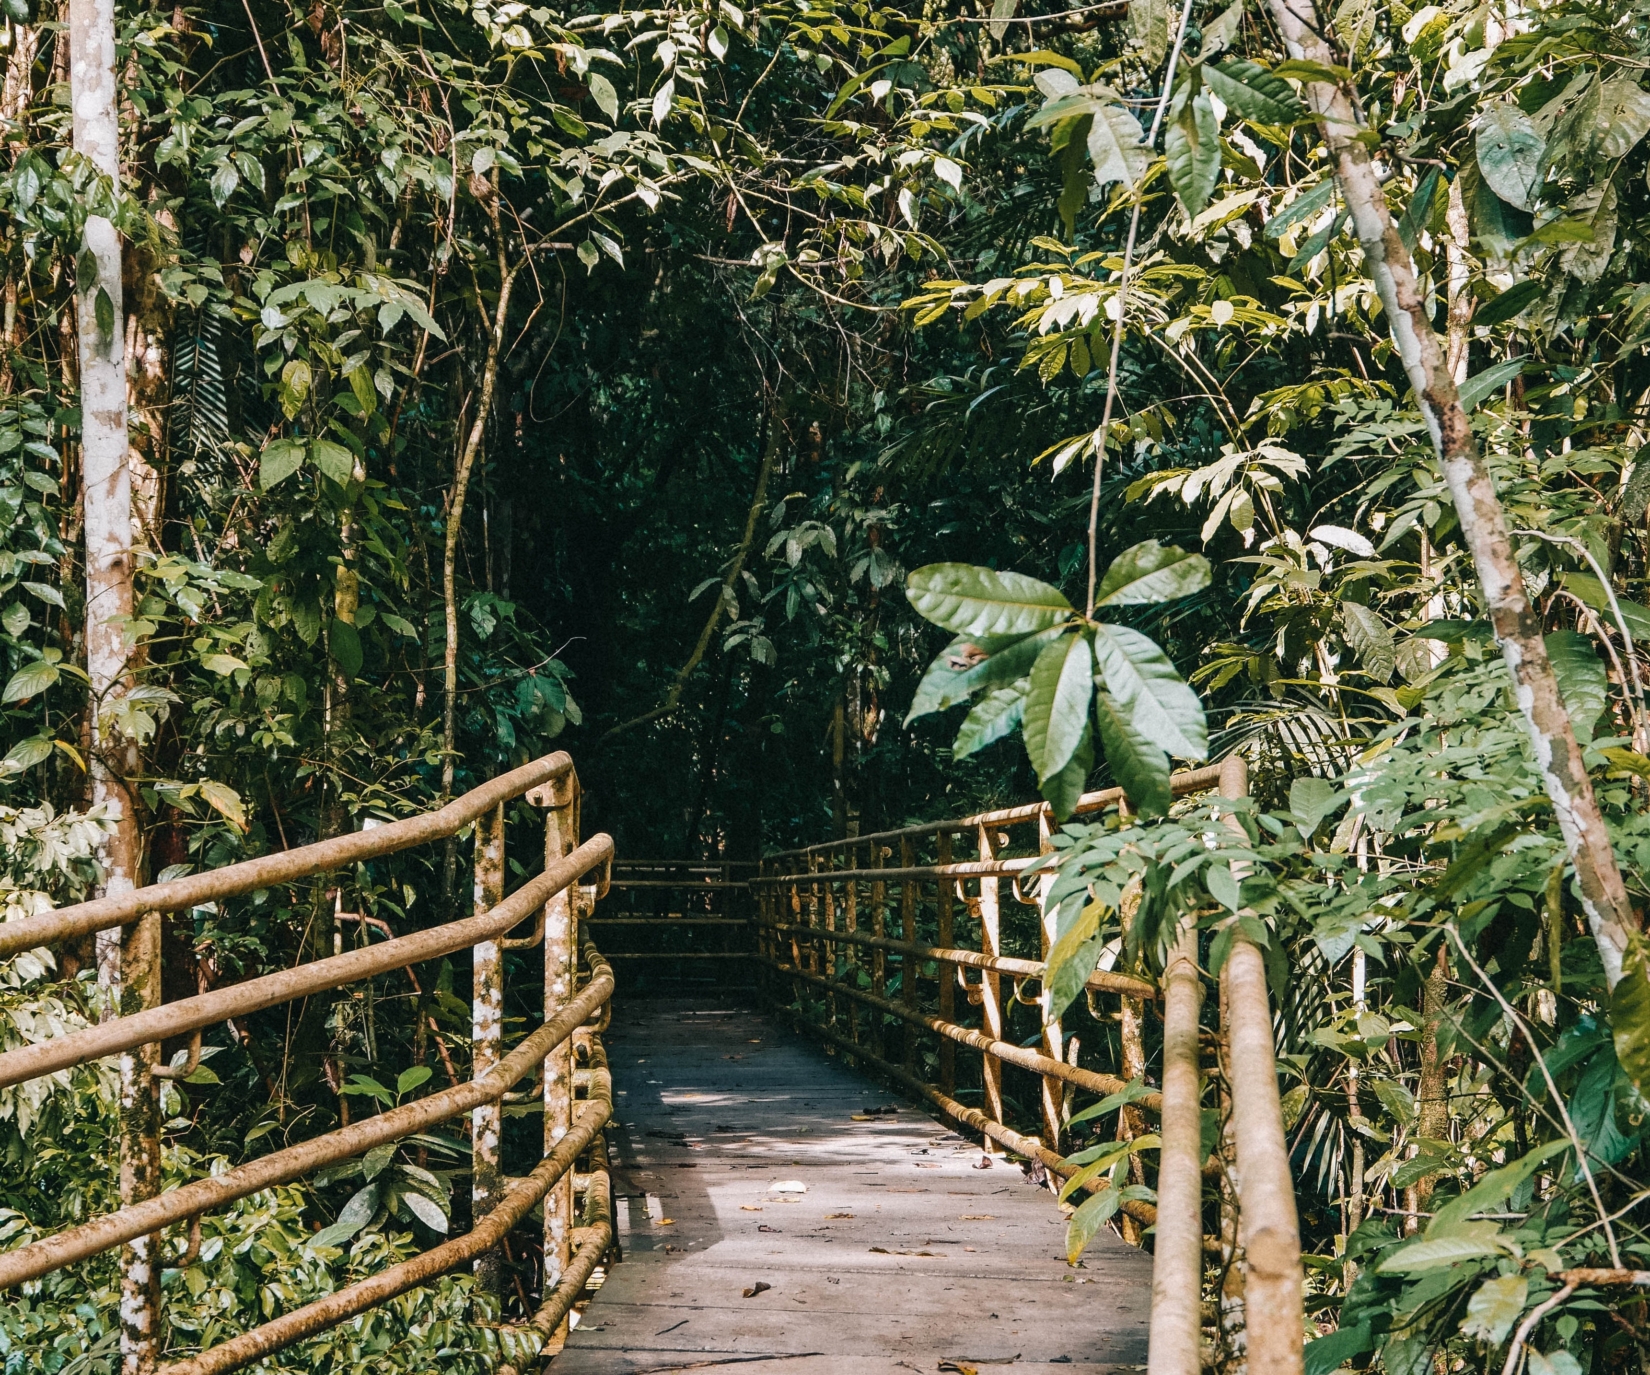 Wooden bridge leading into thick forest in Manuel Antonio National Park, Costa Rica